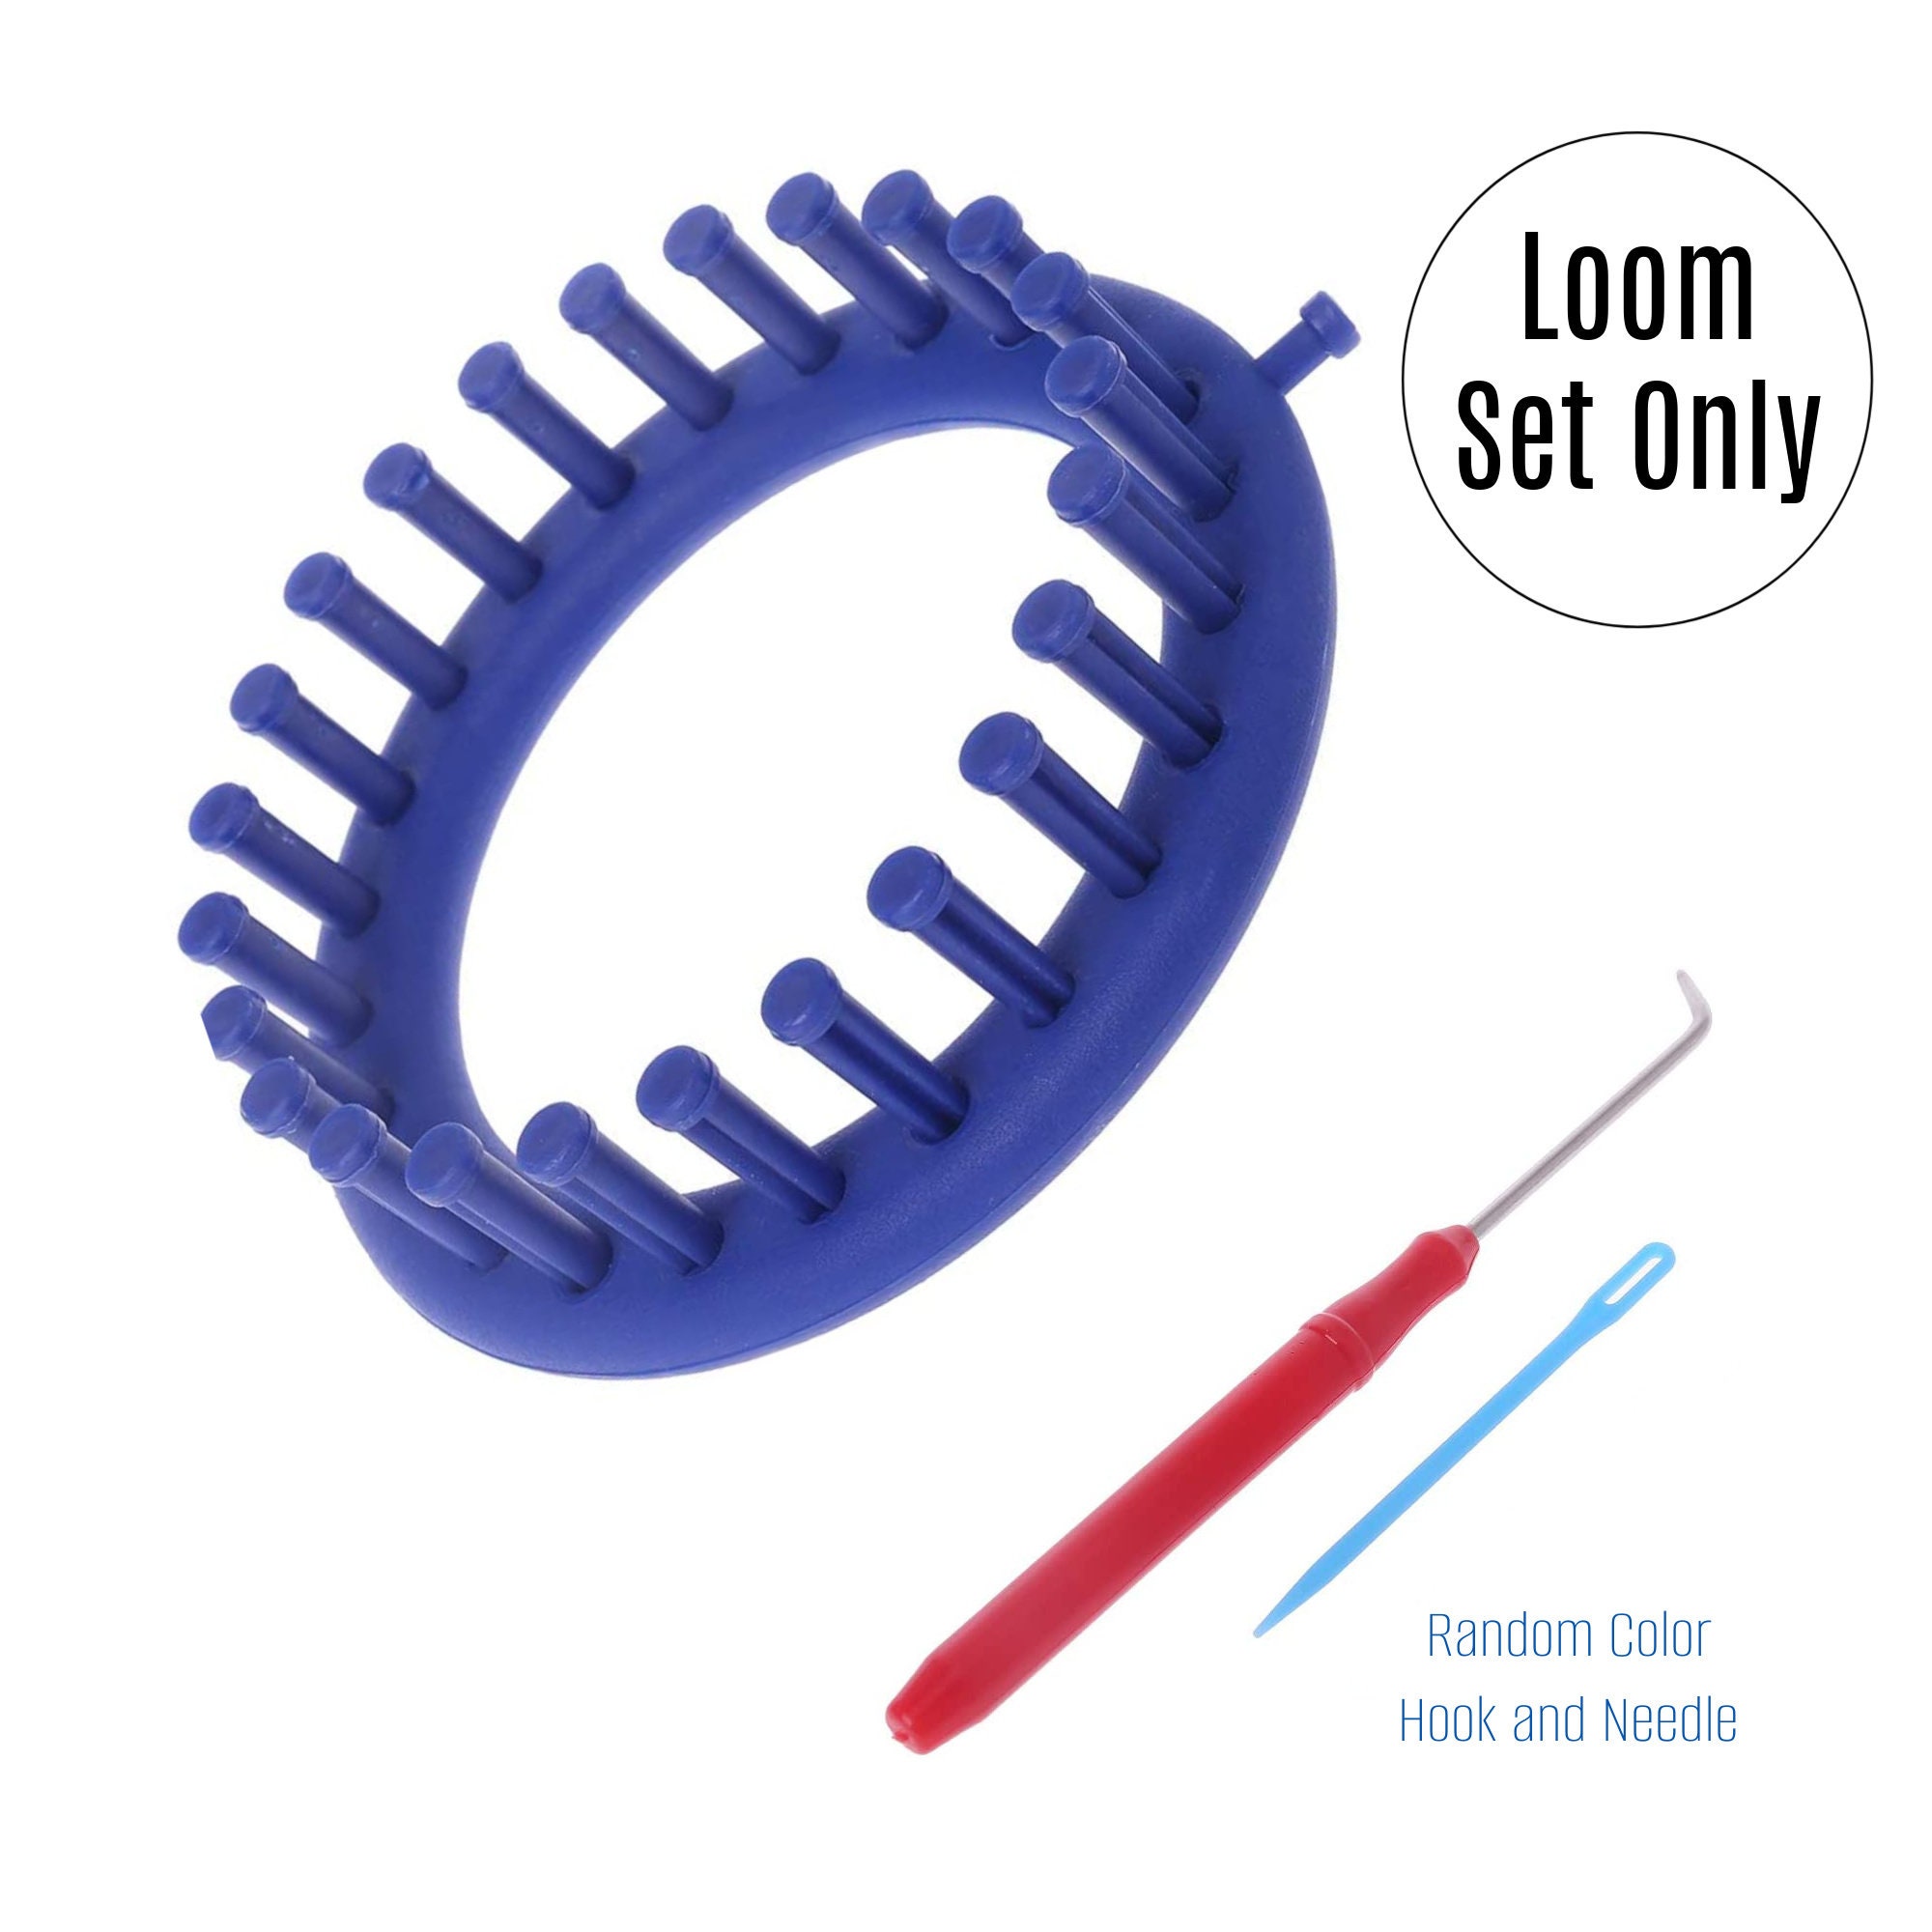 S SELDORAUK Round Knitting Looms Set - 5 Size Plastic Circle Looms Knitting with 2 Knitting Needles and 2 Crochet Hooks for Hat Sweater Sock Knitter